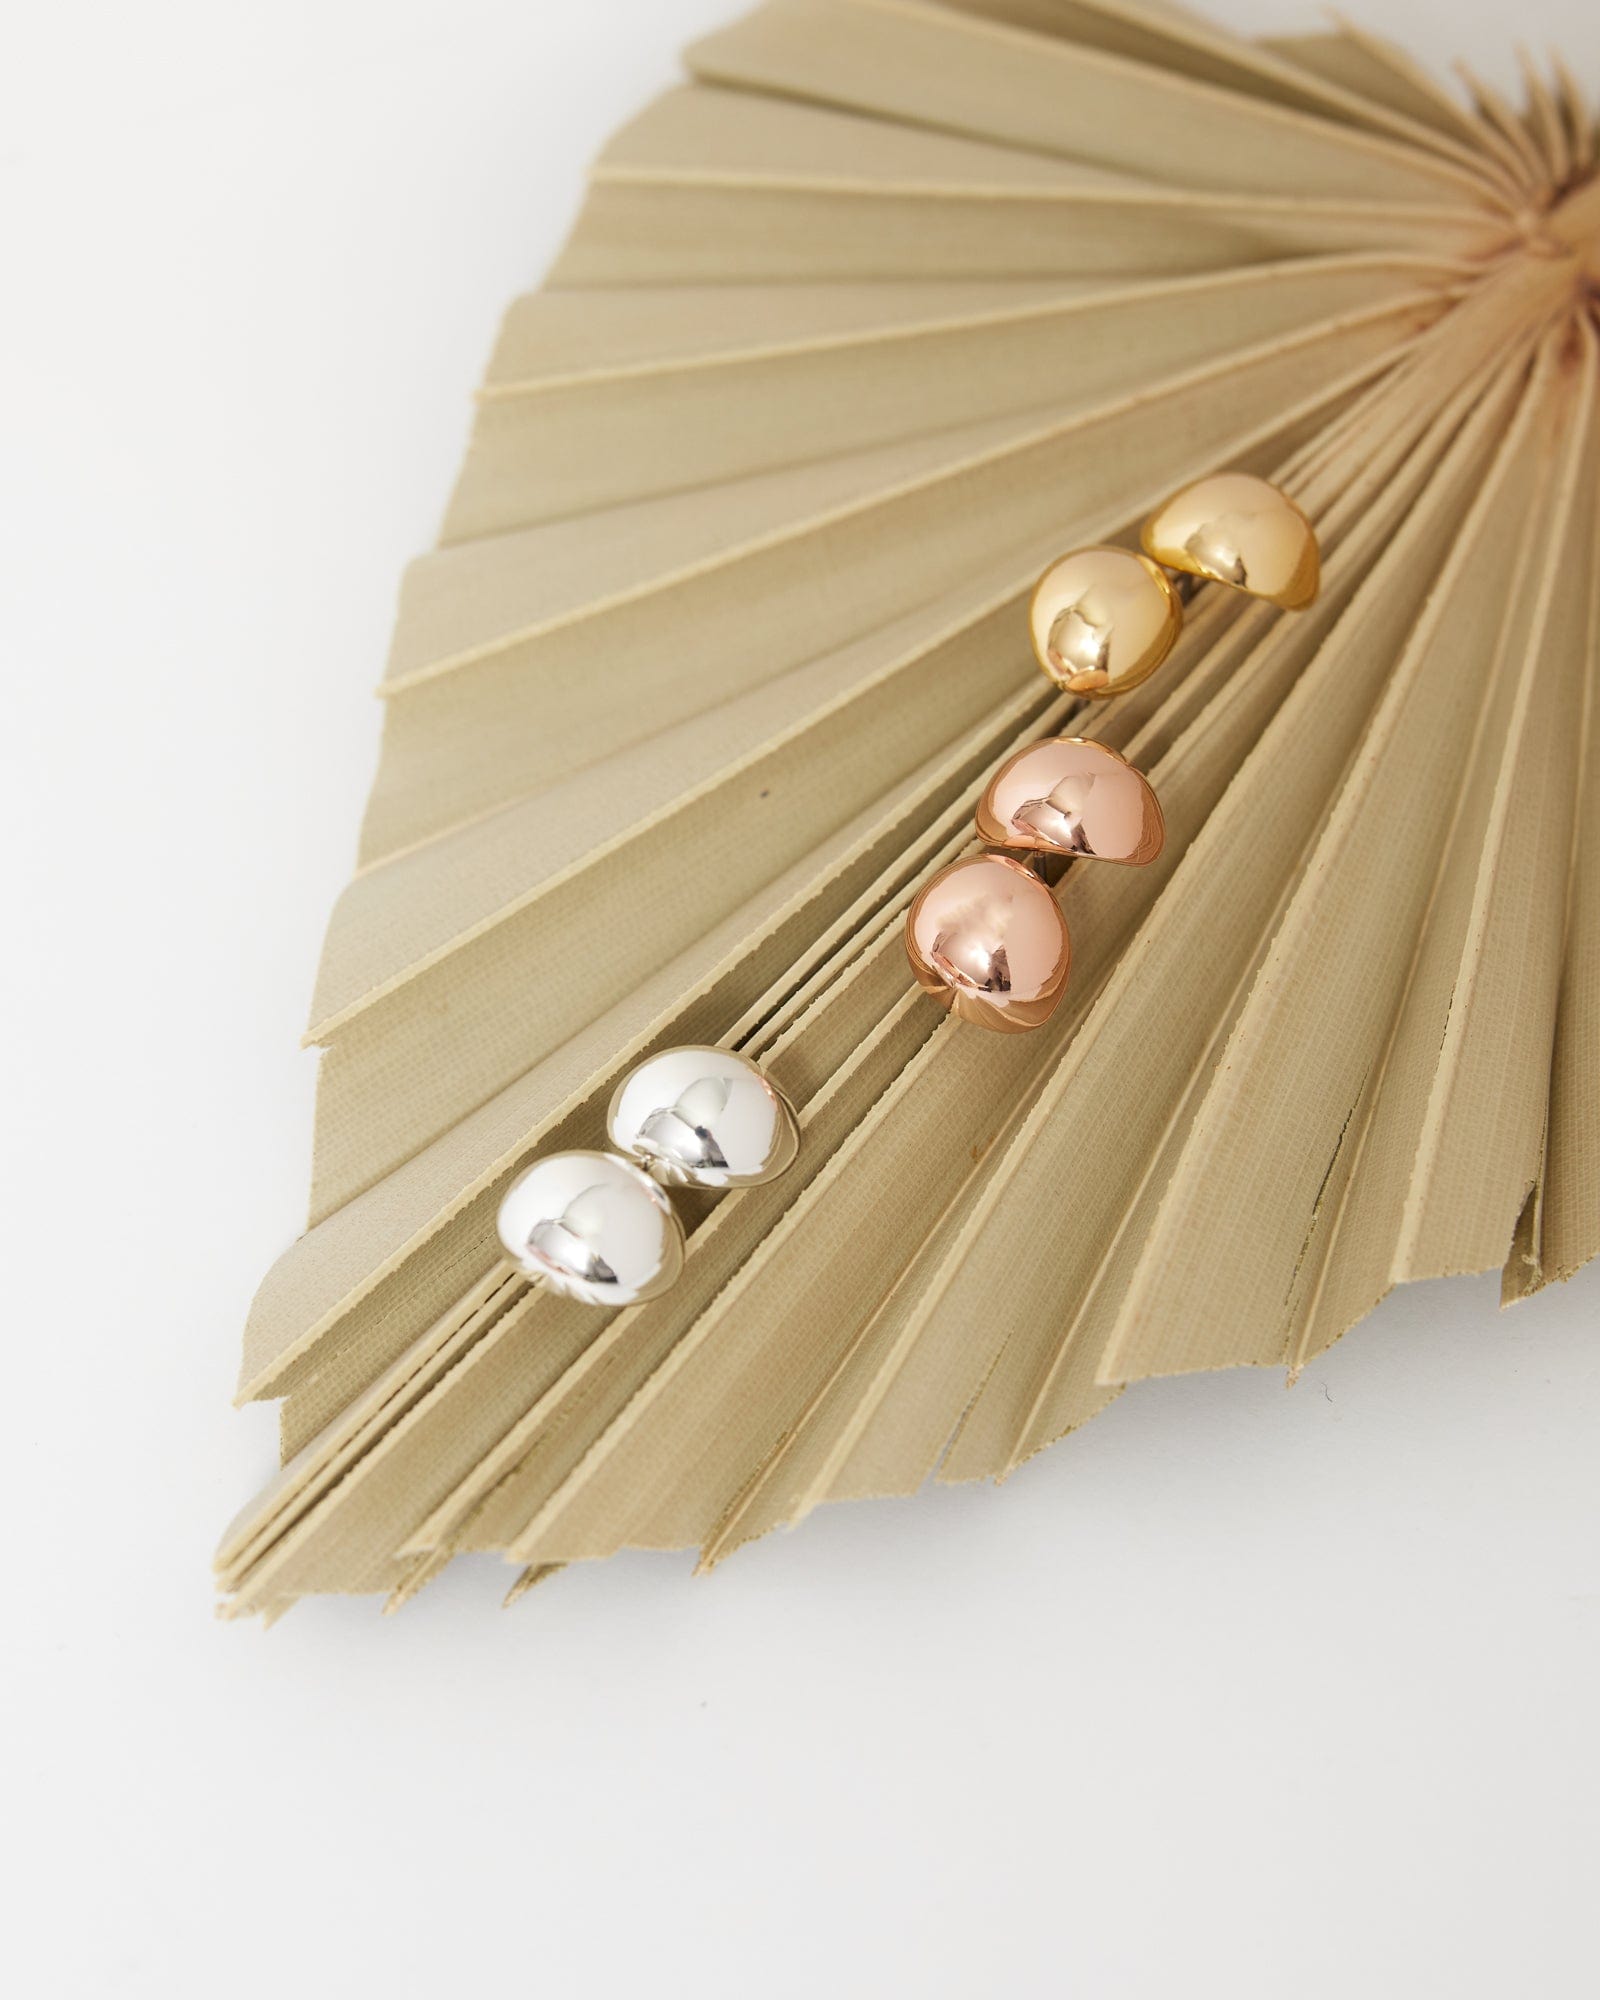 Set of 3 bubble earrings in gold, silver and rose gold